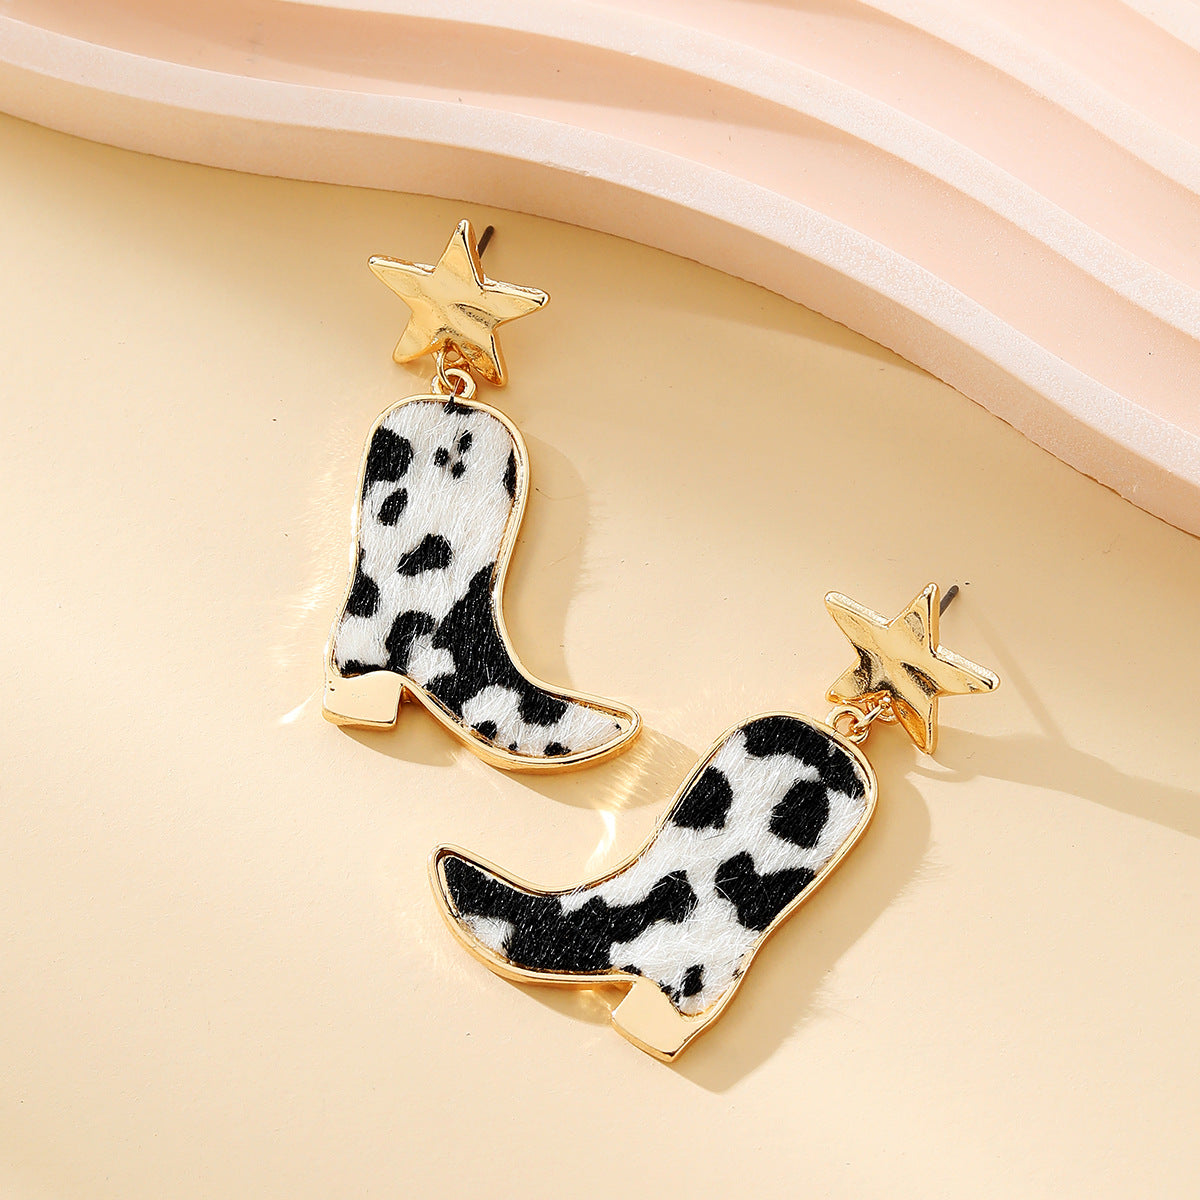 Western style cow patterned boots and star earrings